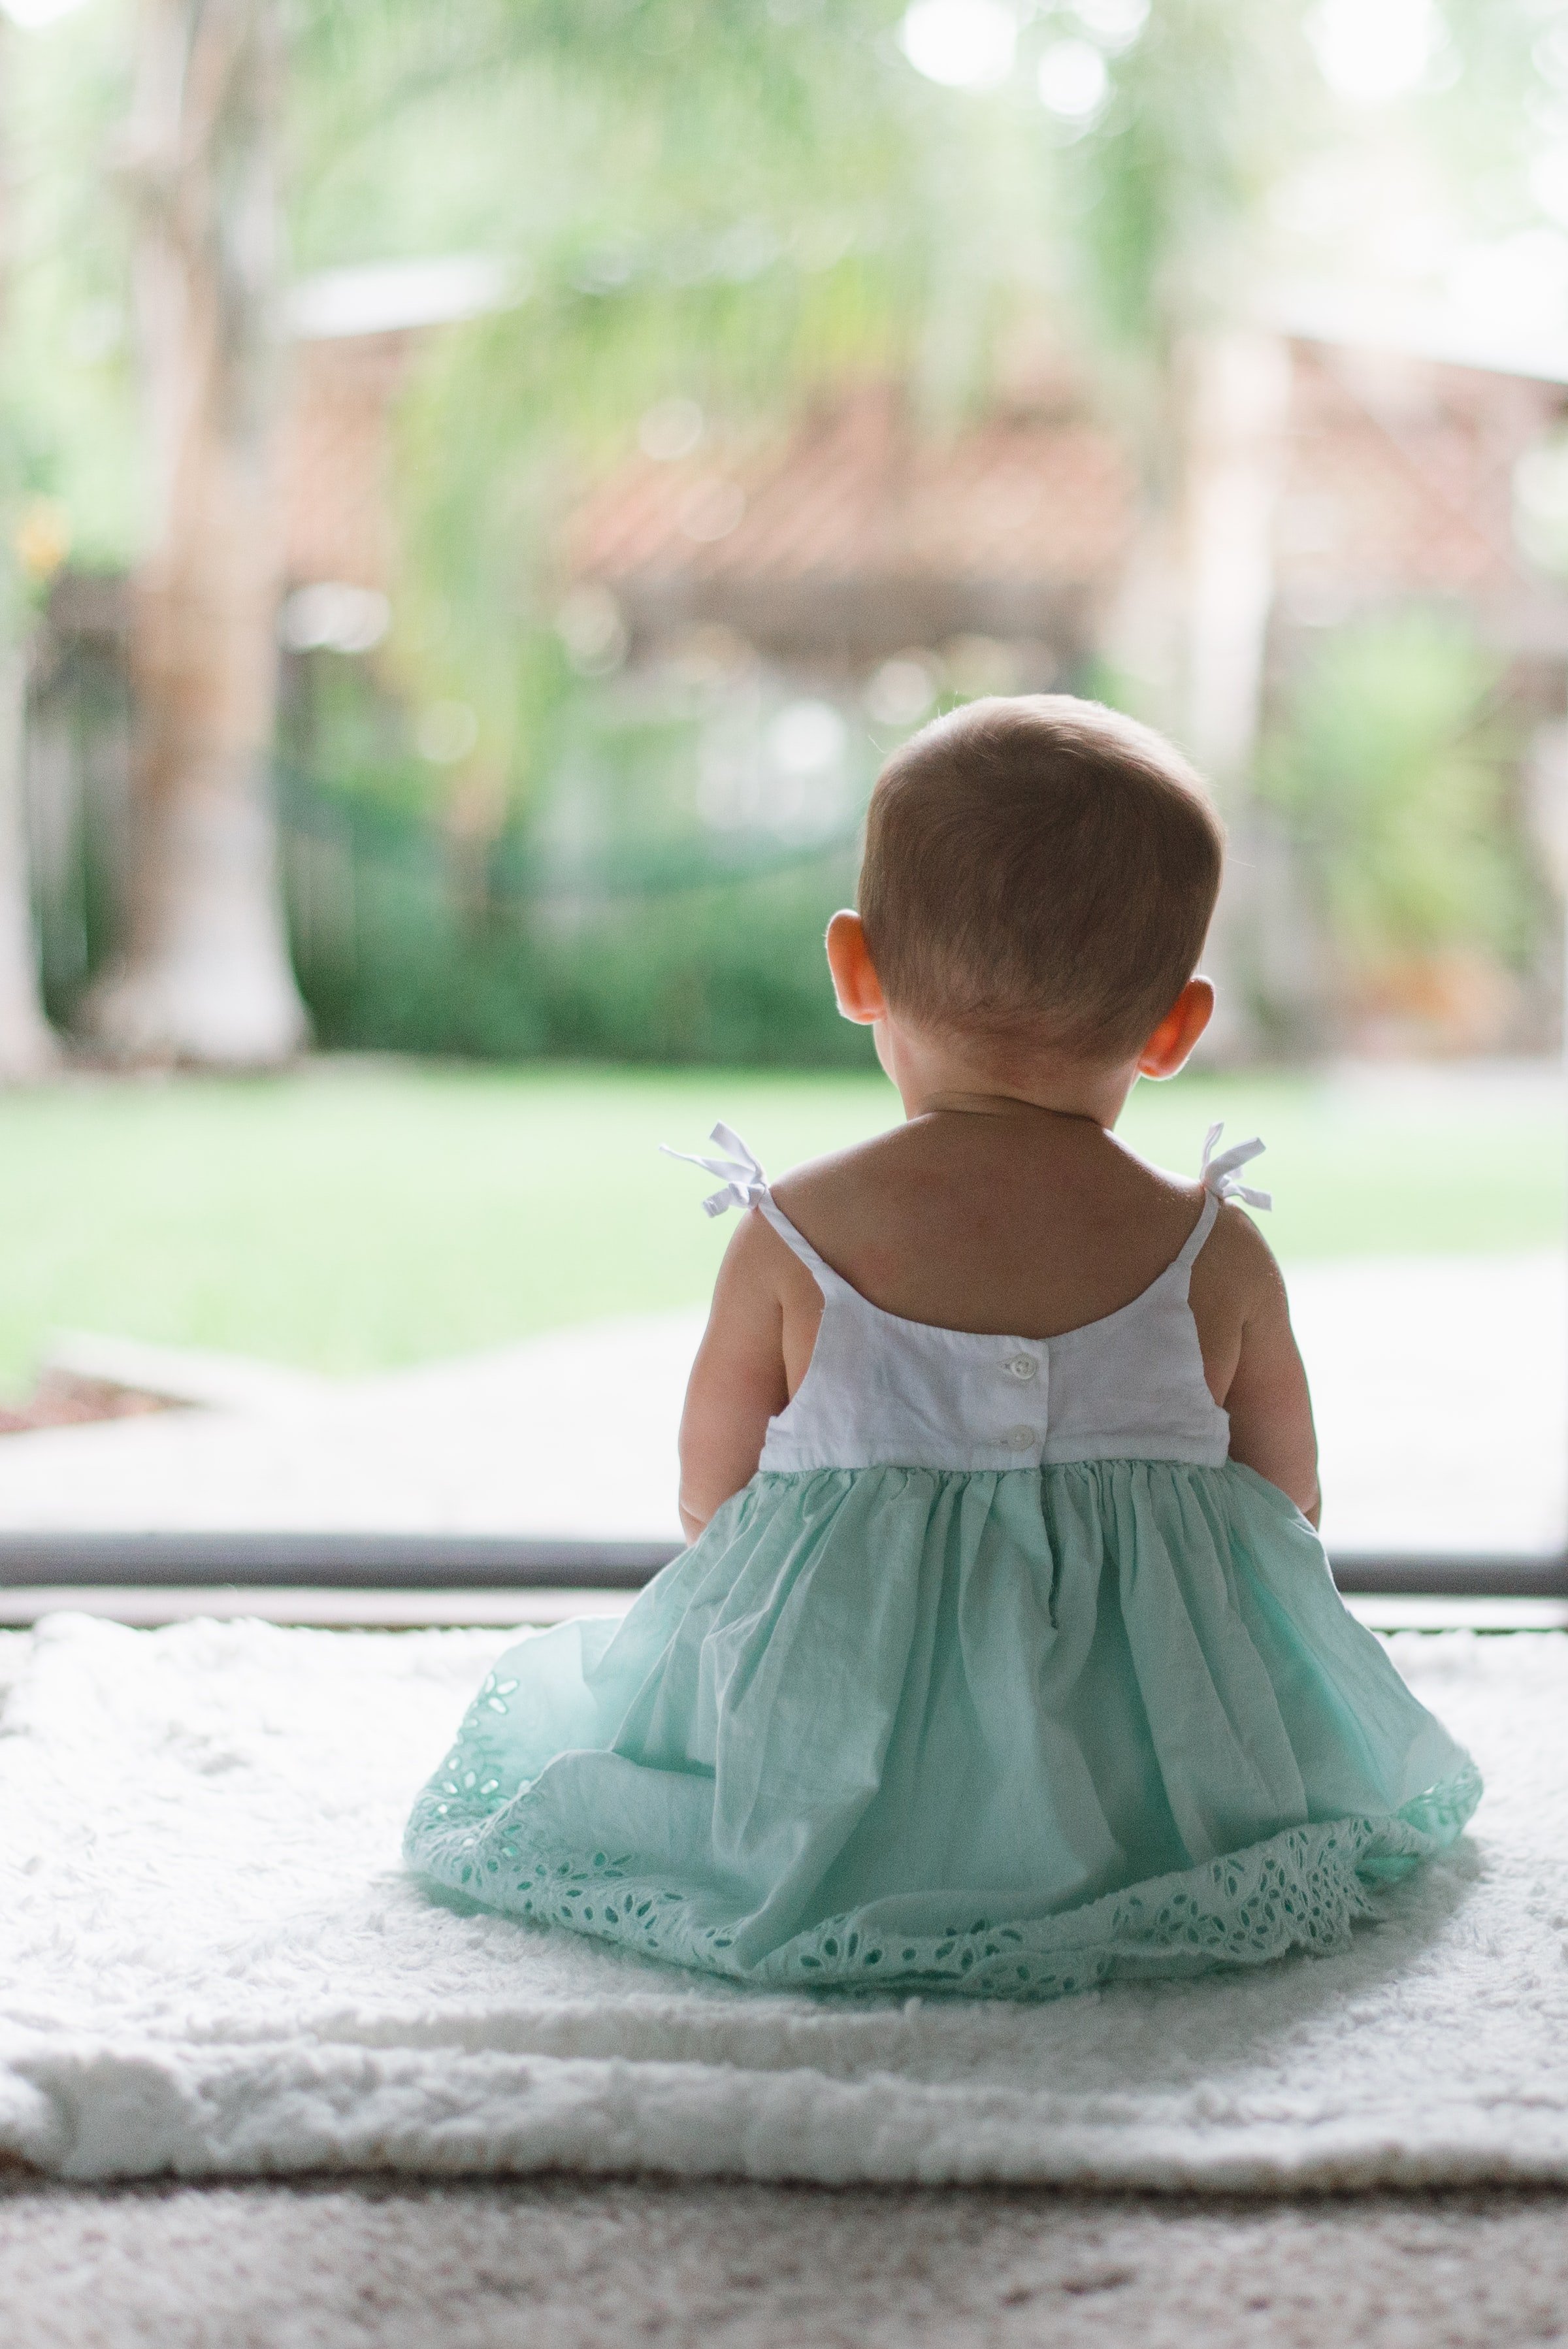 A little girl dressed in a green and white frock is pictured sitting outside. | Source: Unsplash